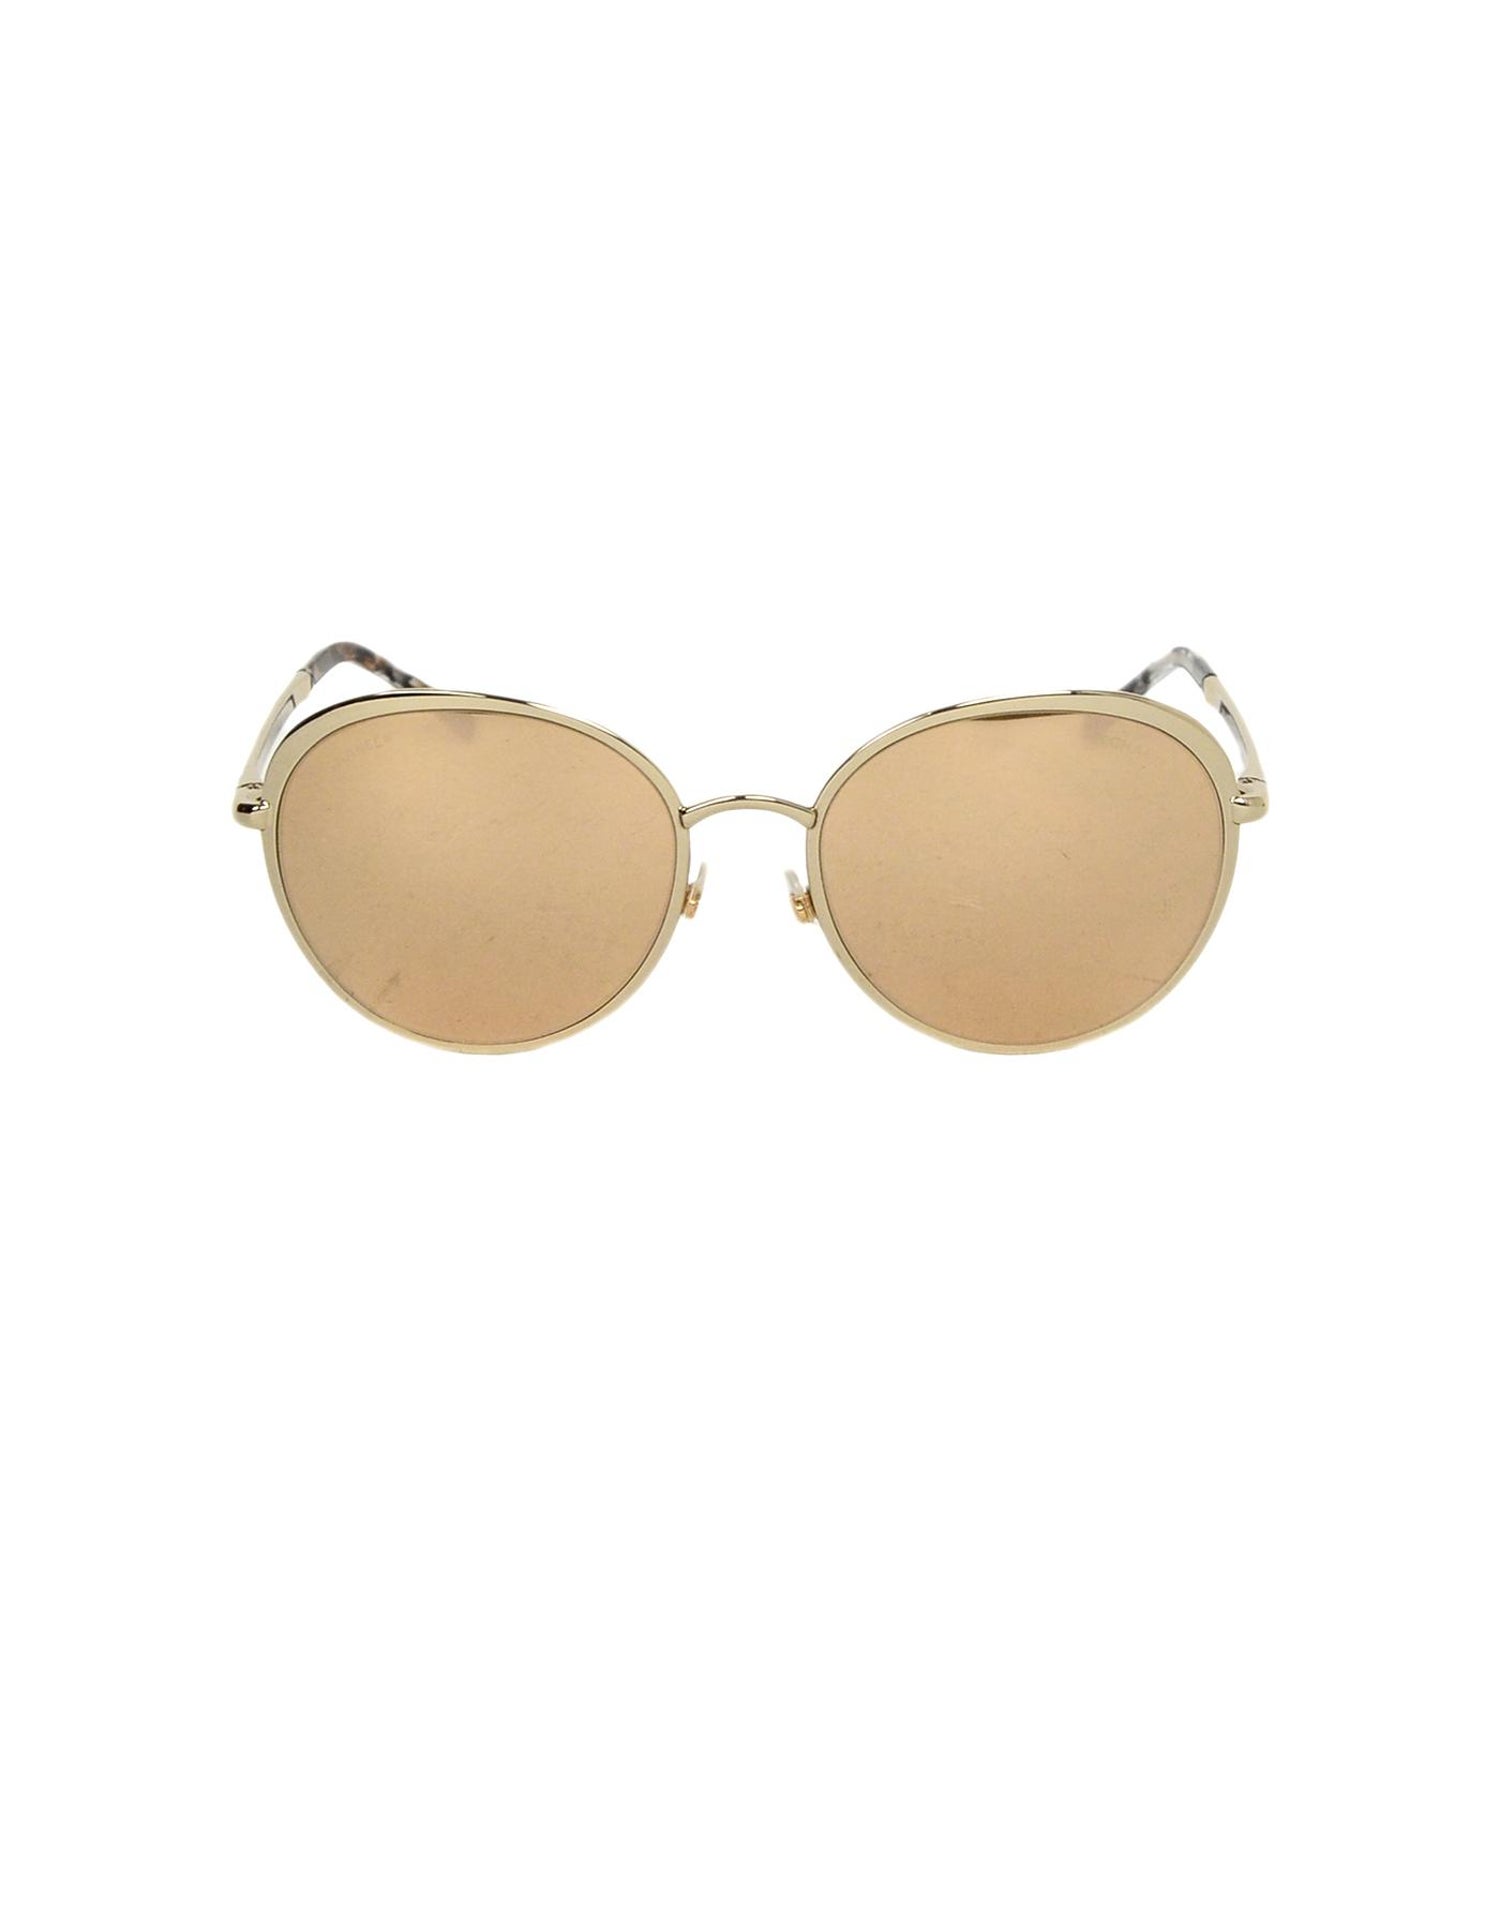 Chanel 18K Gold Mirrored Lenses and Metal Rounded Sunglasses 